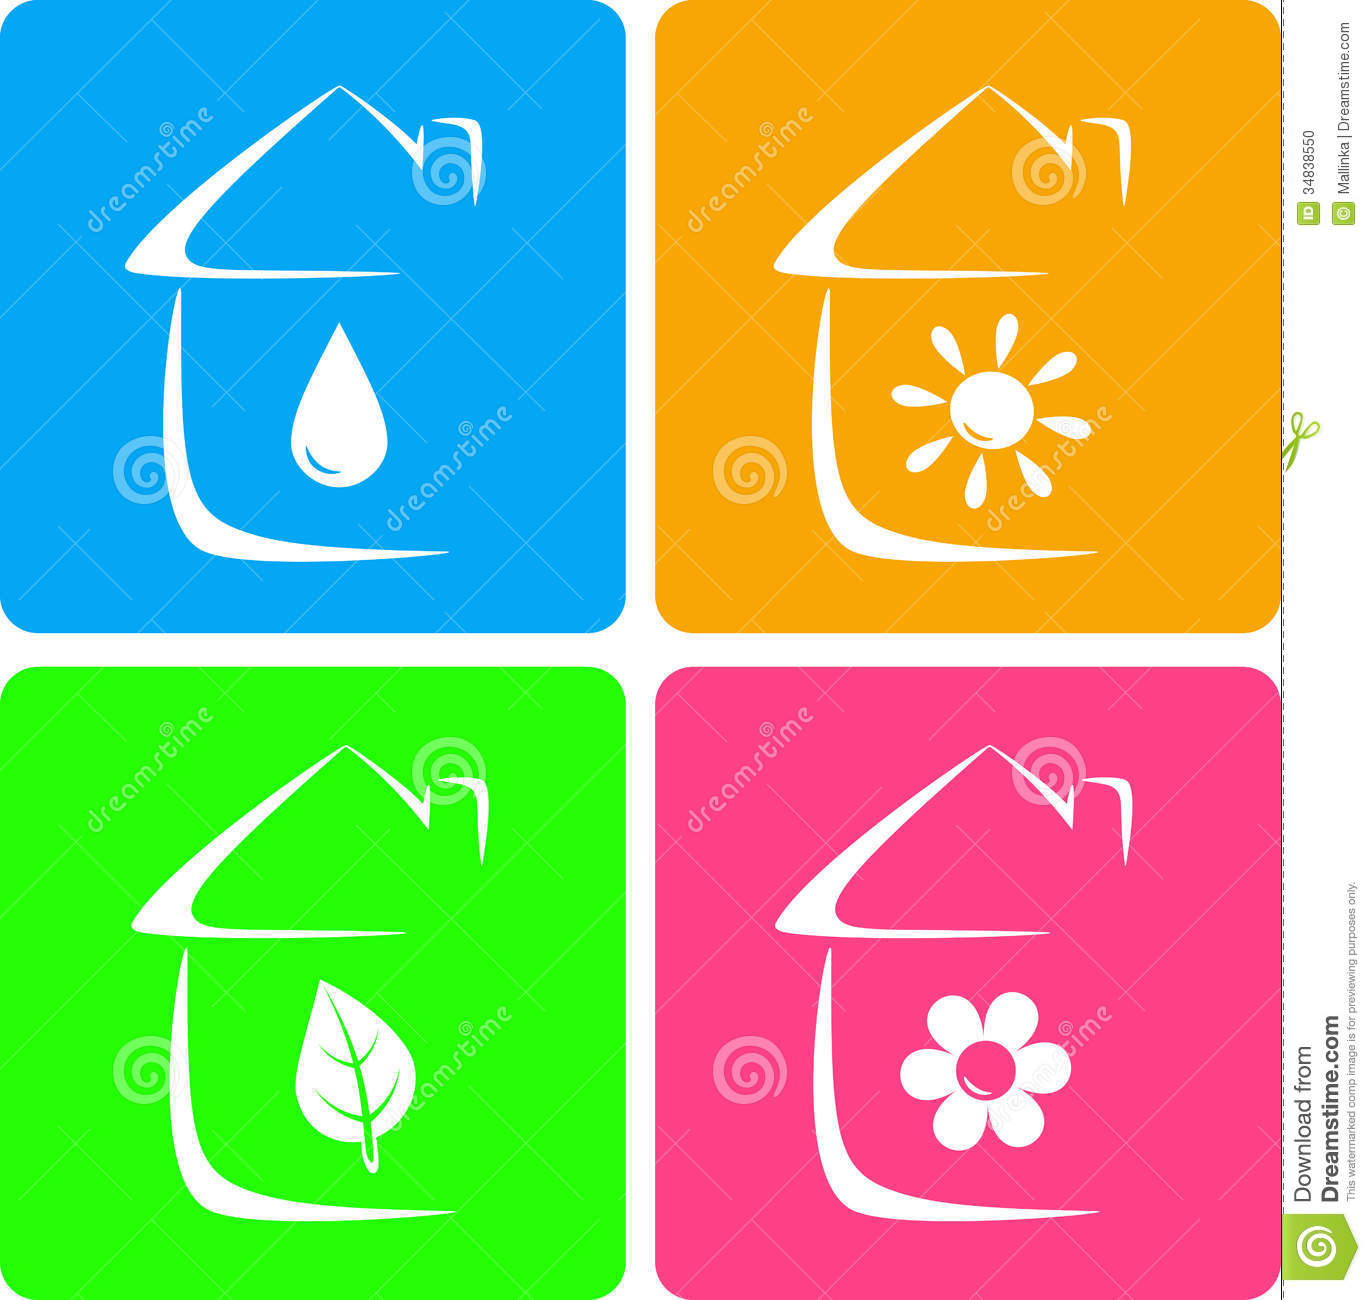     Of Heater Plumbing And Landscaping Stock Photo   Image  34838550